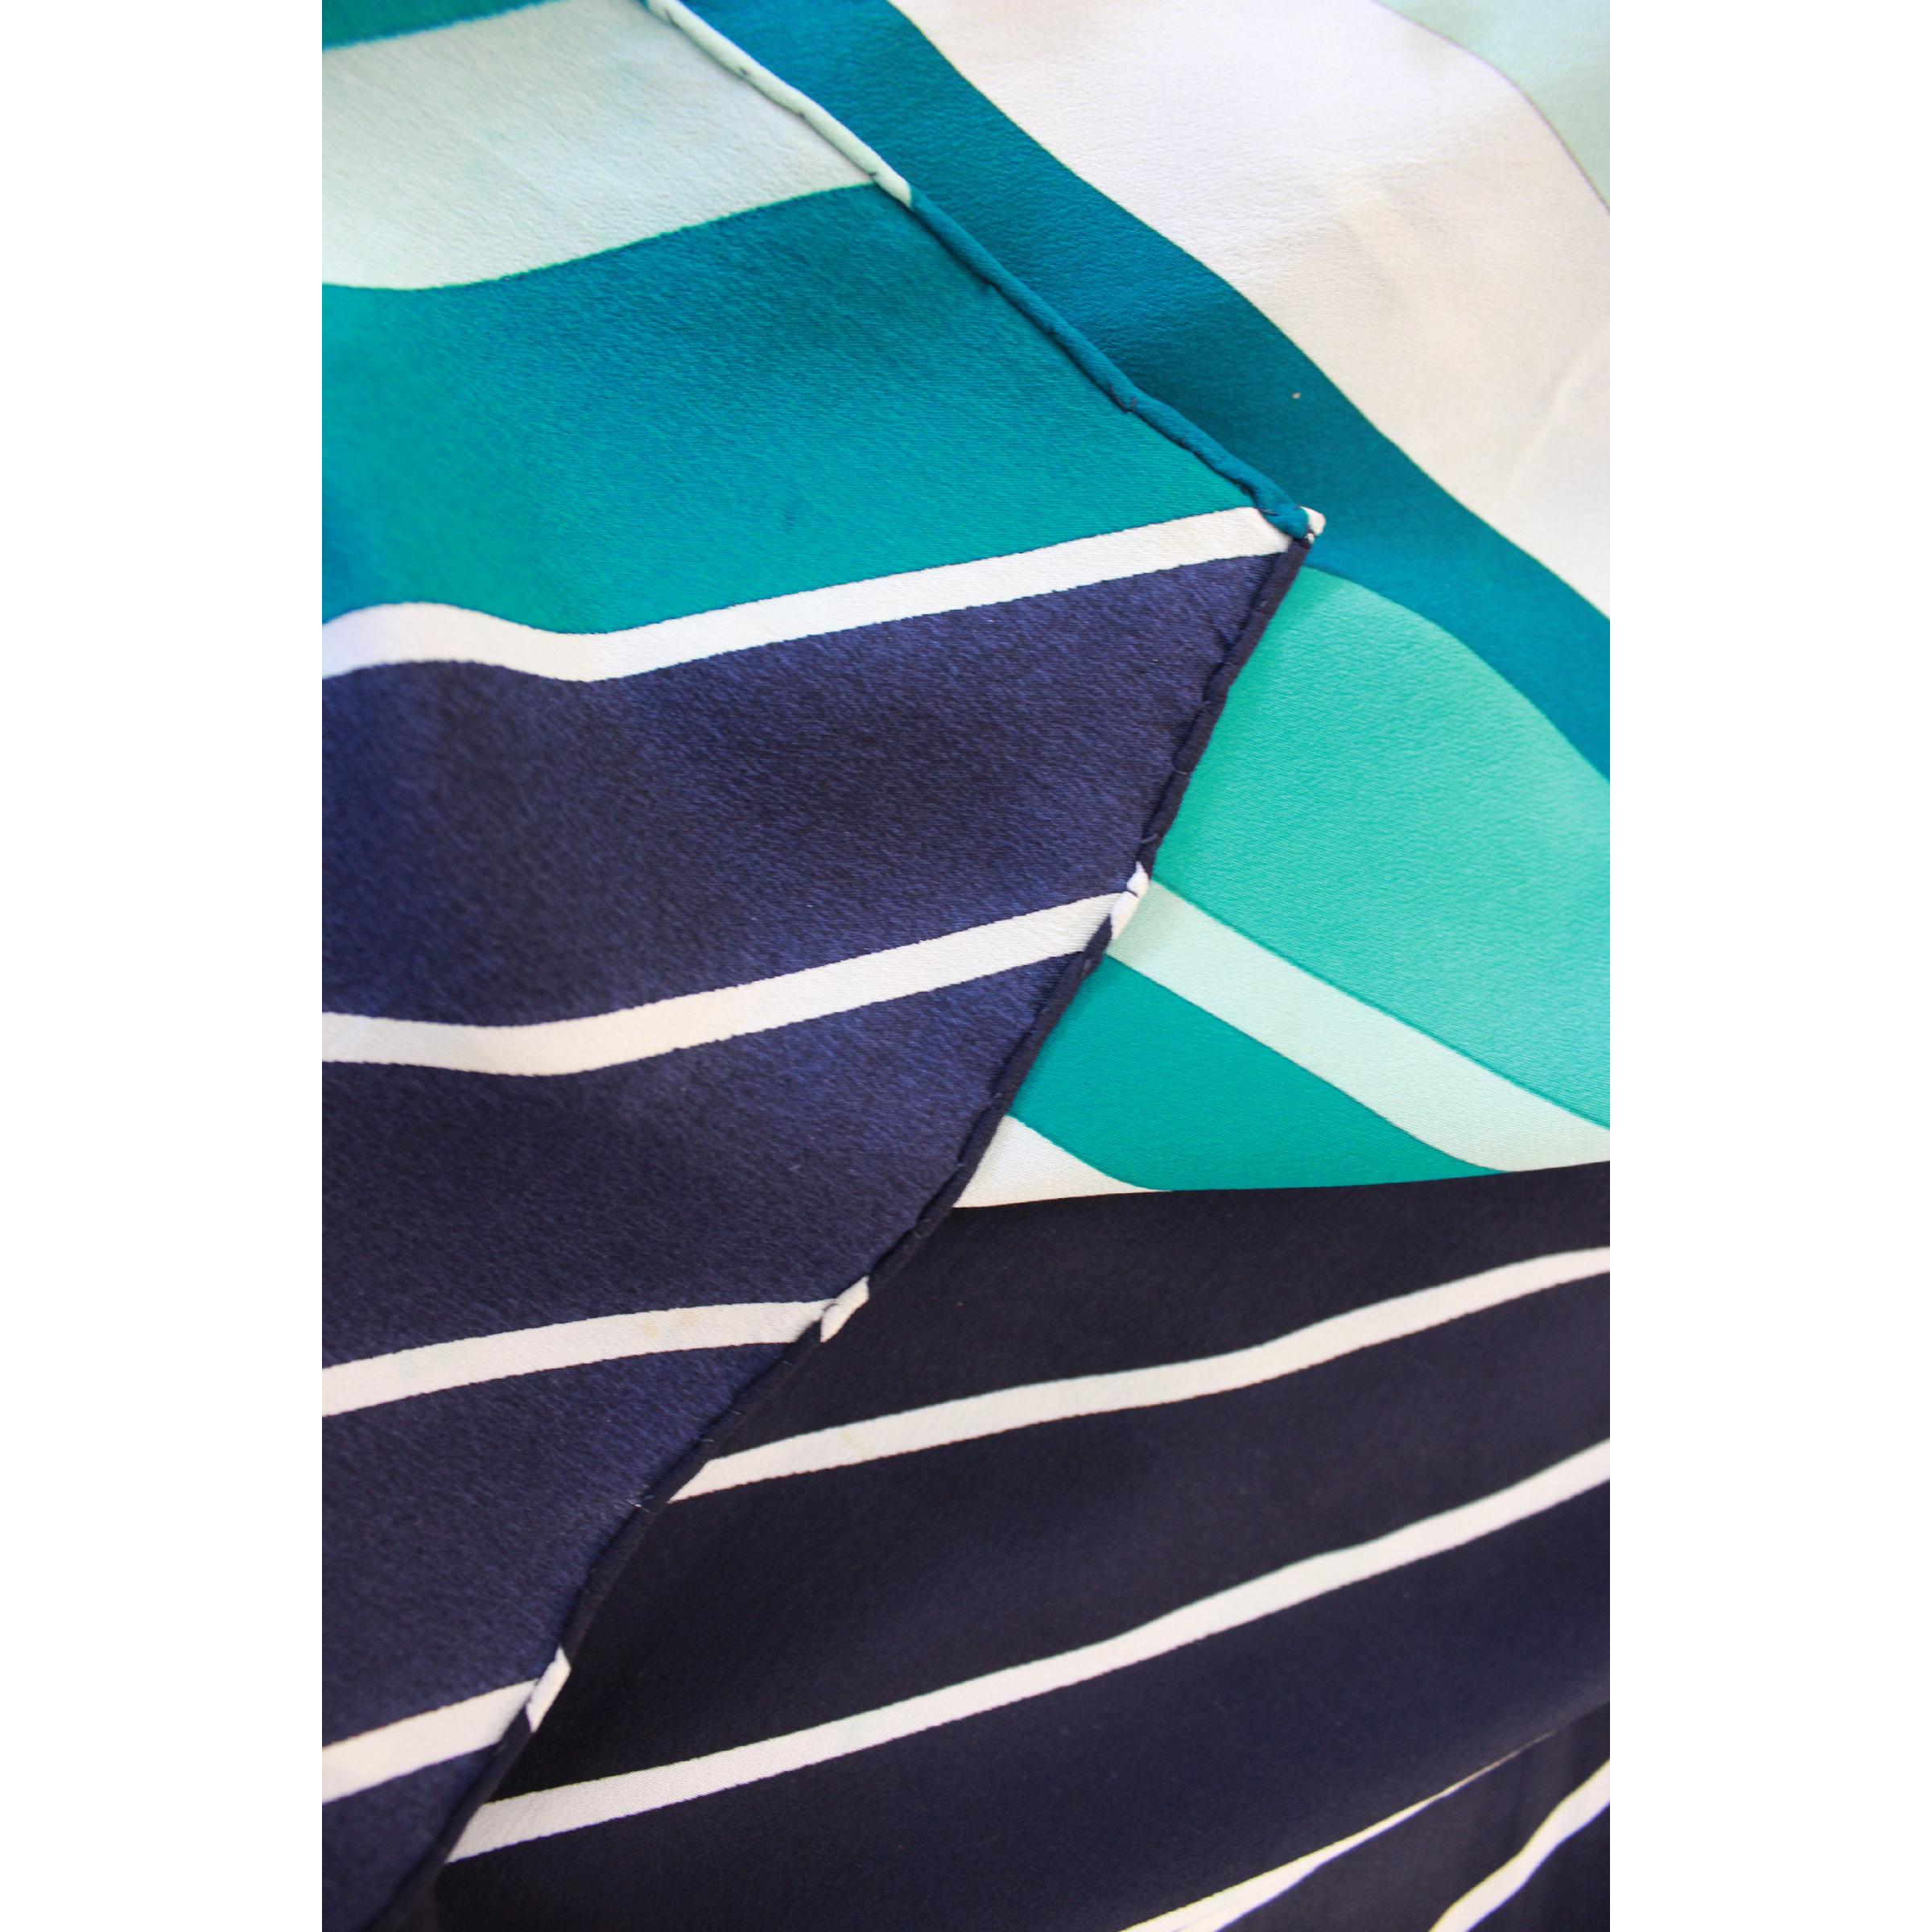 Vintage Valentino scarf. Blue, green and white striped, 100% silk. 80s. Made in Italy. Very good vintage condition, some stains present. 

Measures: 86 x 86 cm